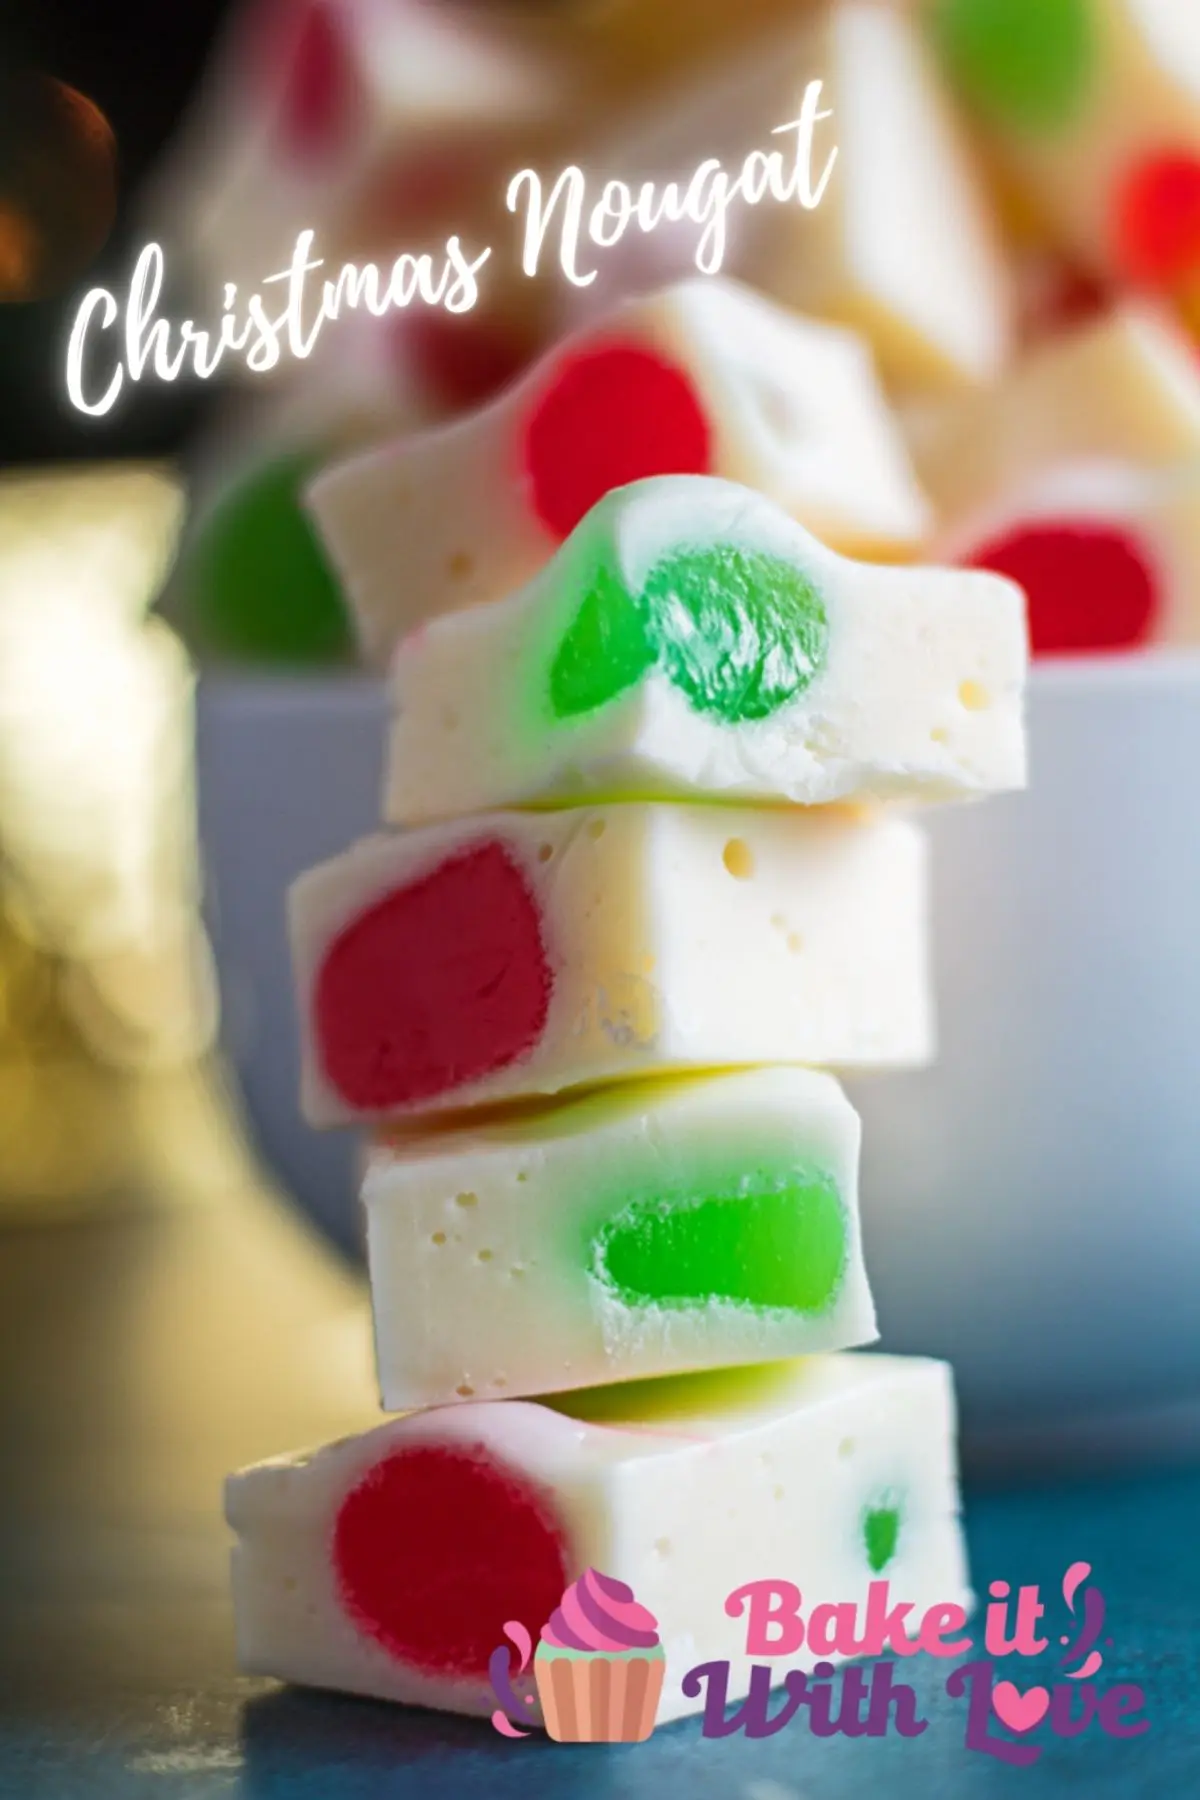 pin with vertical closeup image of the Christmas Nougat and text overlay.